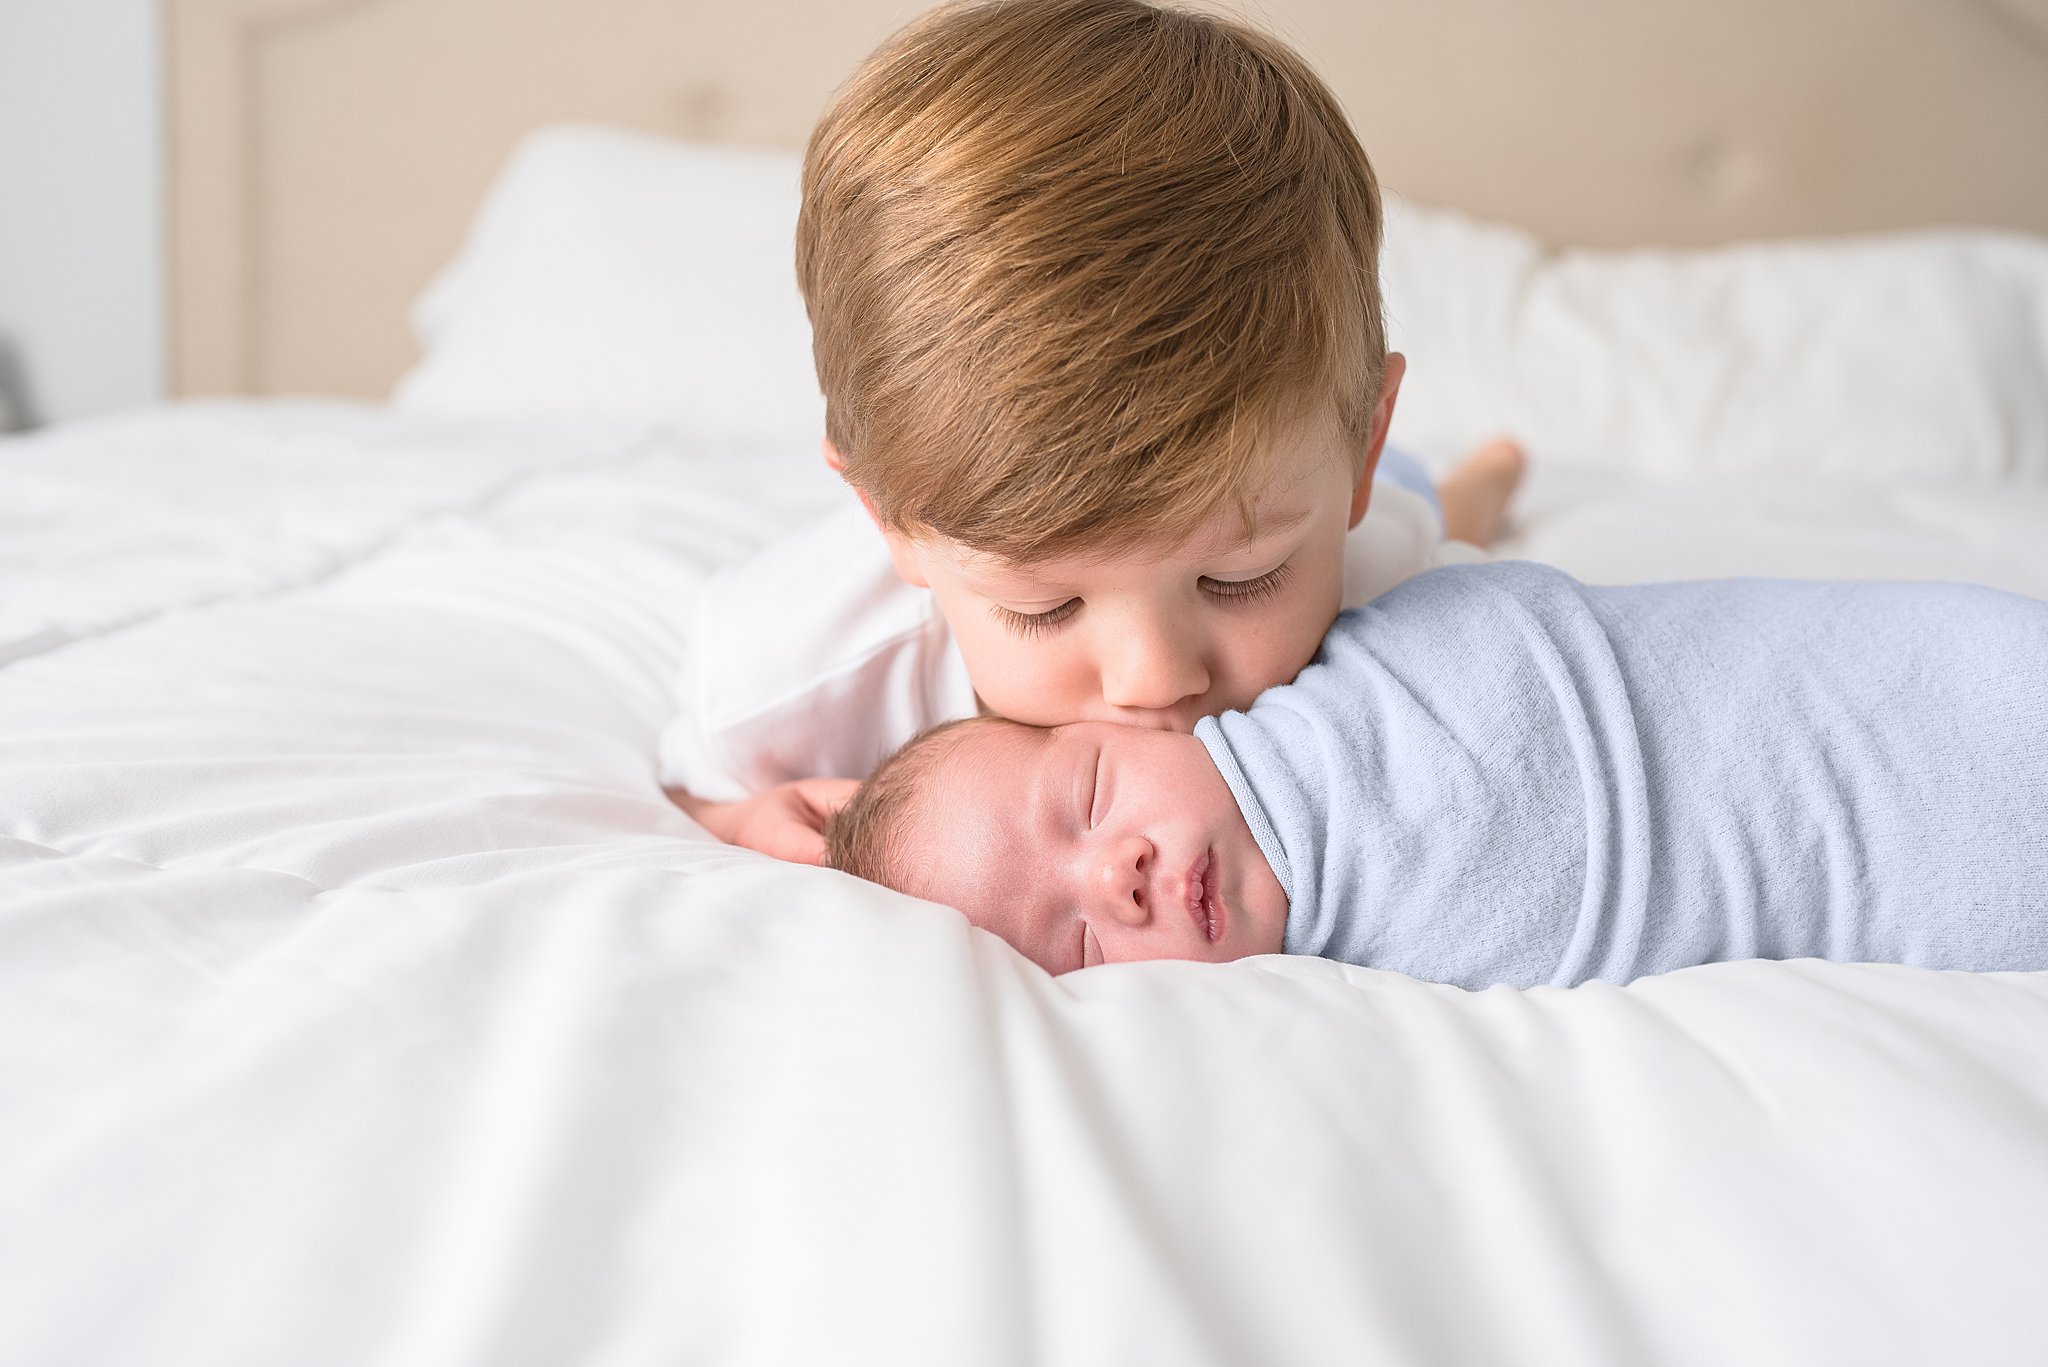 A newborn baby sleeps on a white bed with his older brother kissing his cheek San Diego Toy Stores